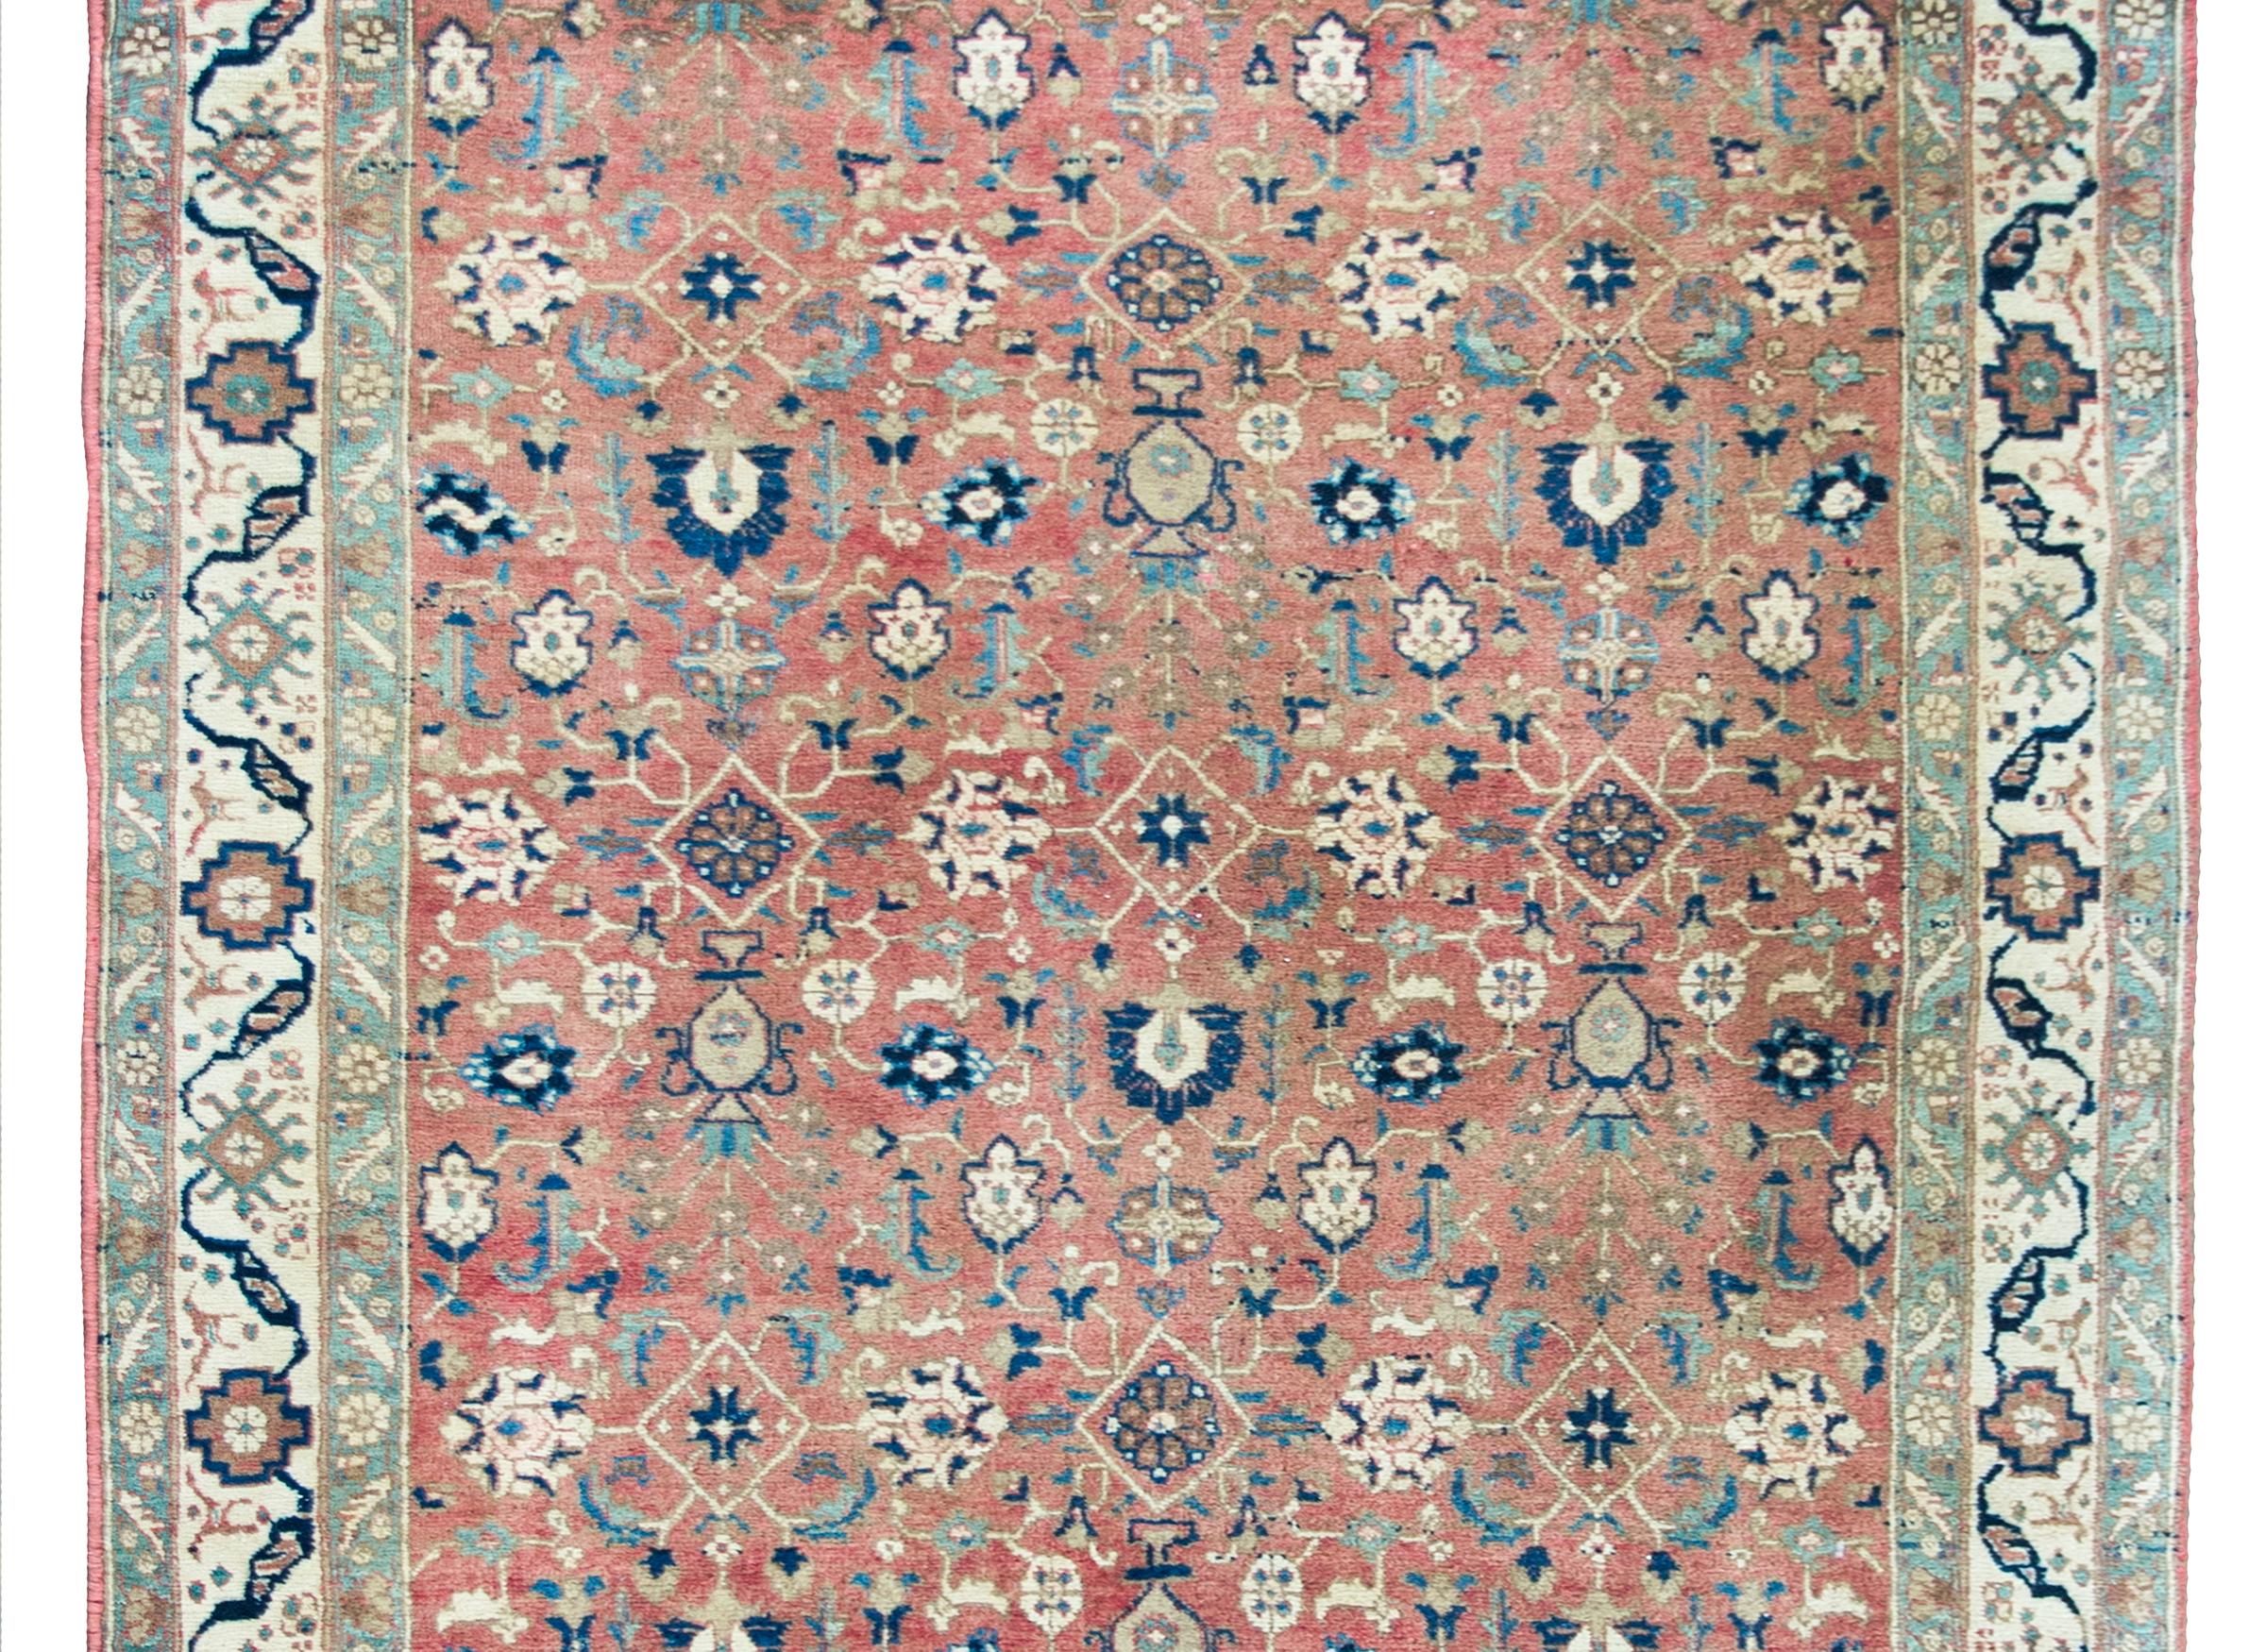 A beautiful mid-20th century Persian Khoy rug with an all-over floral trellis pattern woven in repeated large-scale flowers and vases potted with trees-of-life, set against an orange background, and surrounded by a simple border with more stylized